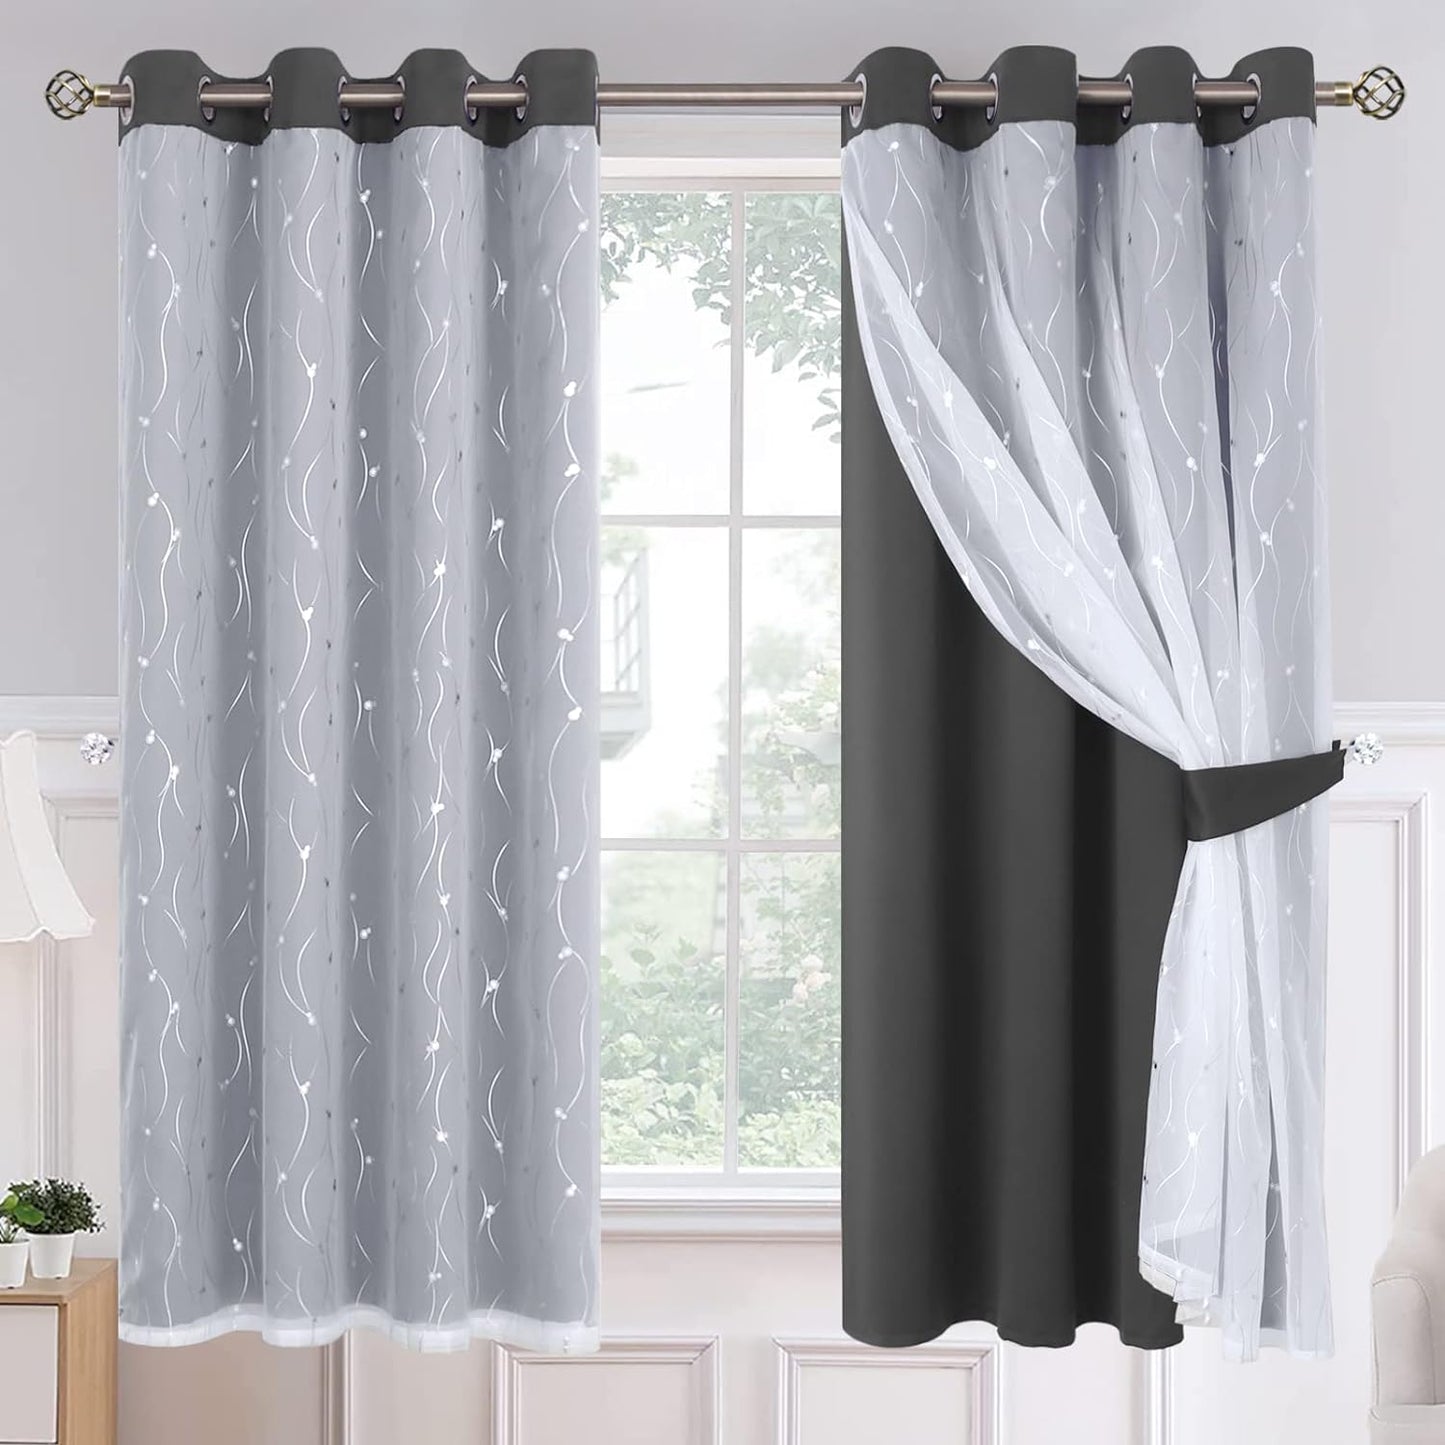 Bgment Grey Blackout Curtains with Sheer Overlay 84 Inches Long，Double Layer Silver Printed Kids Curtains Grommet Thermal Insulated Window Drapes for Living Room, 2 Panel, 52 X 84, Dark Grey  BGment Grey 52W X 63L 